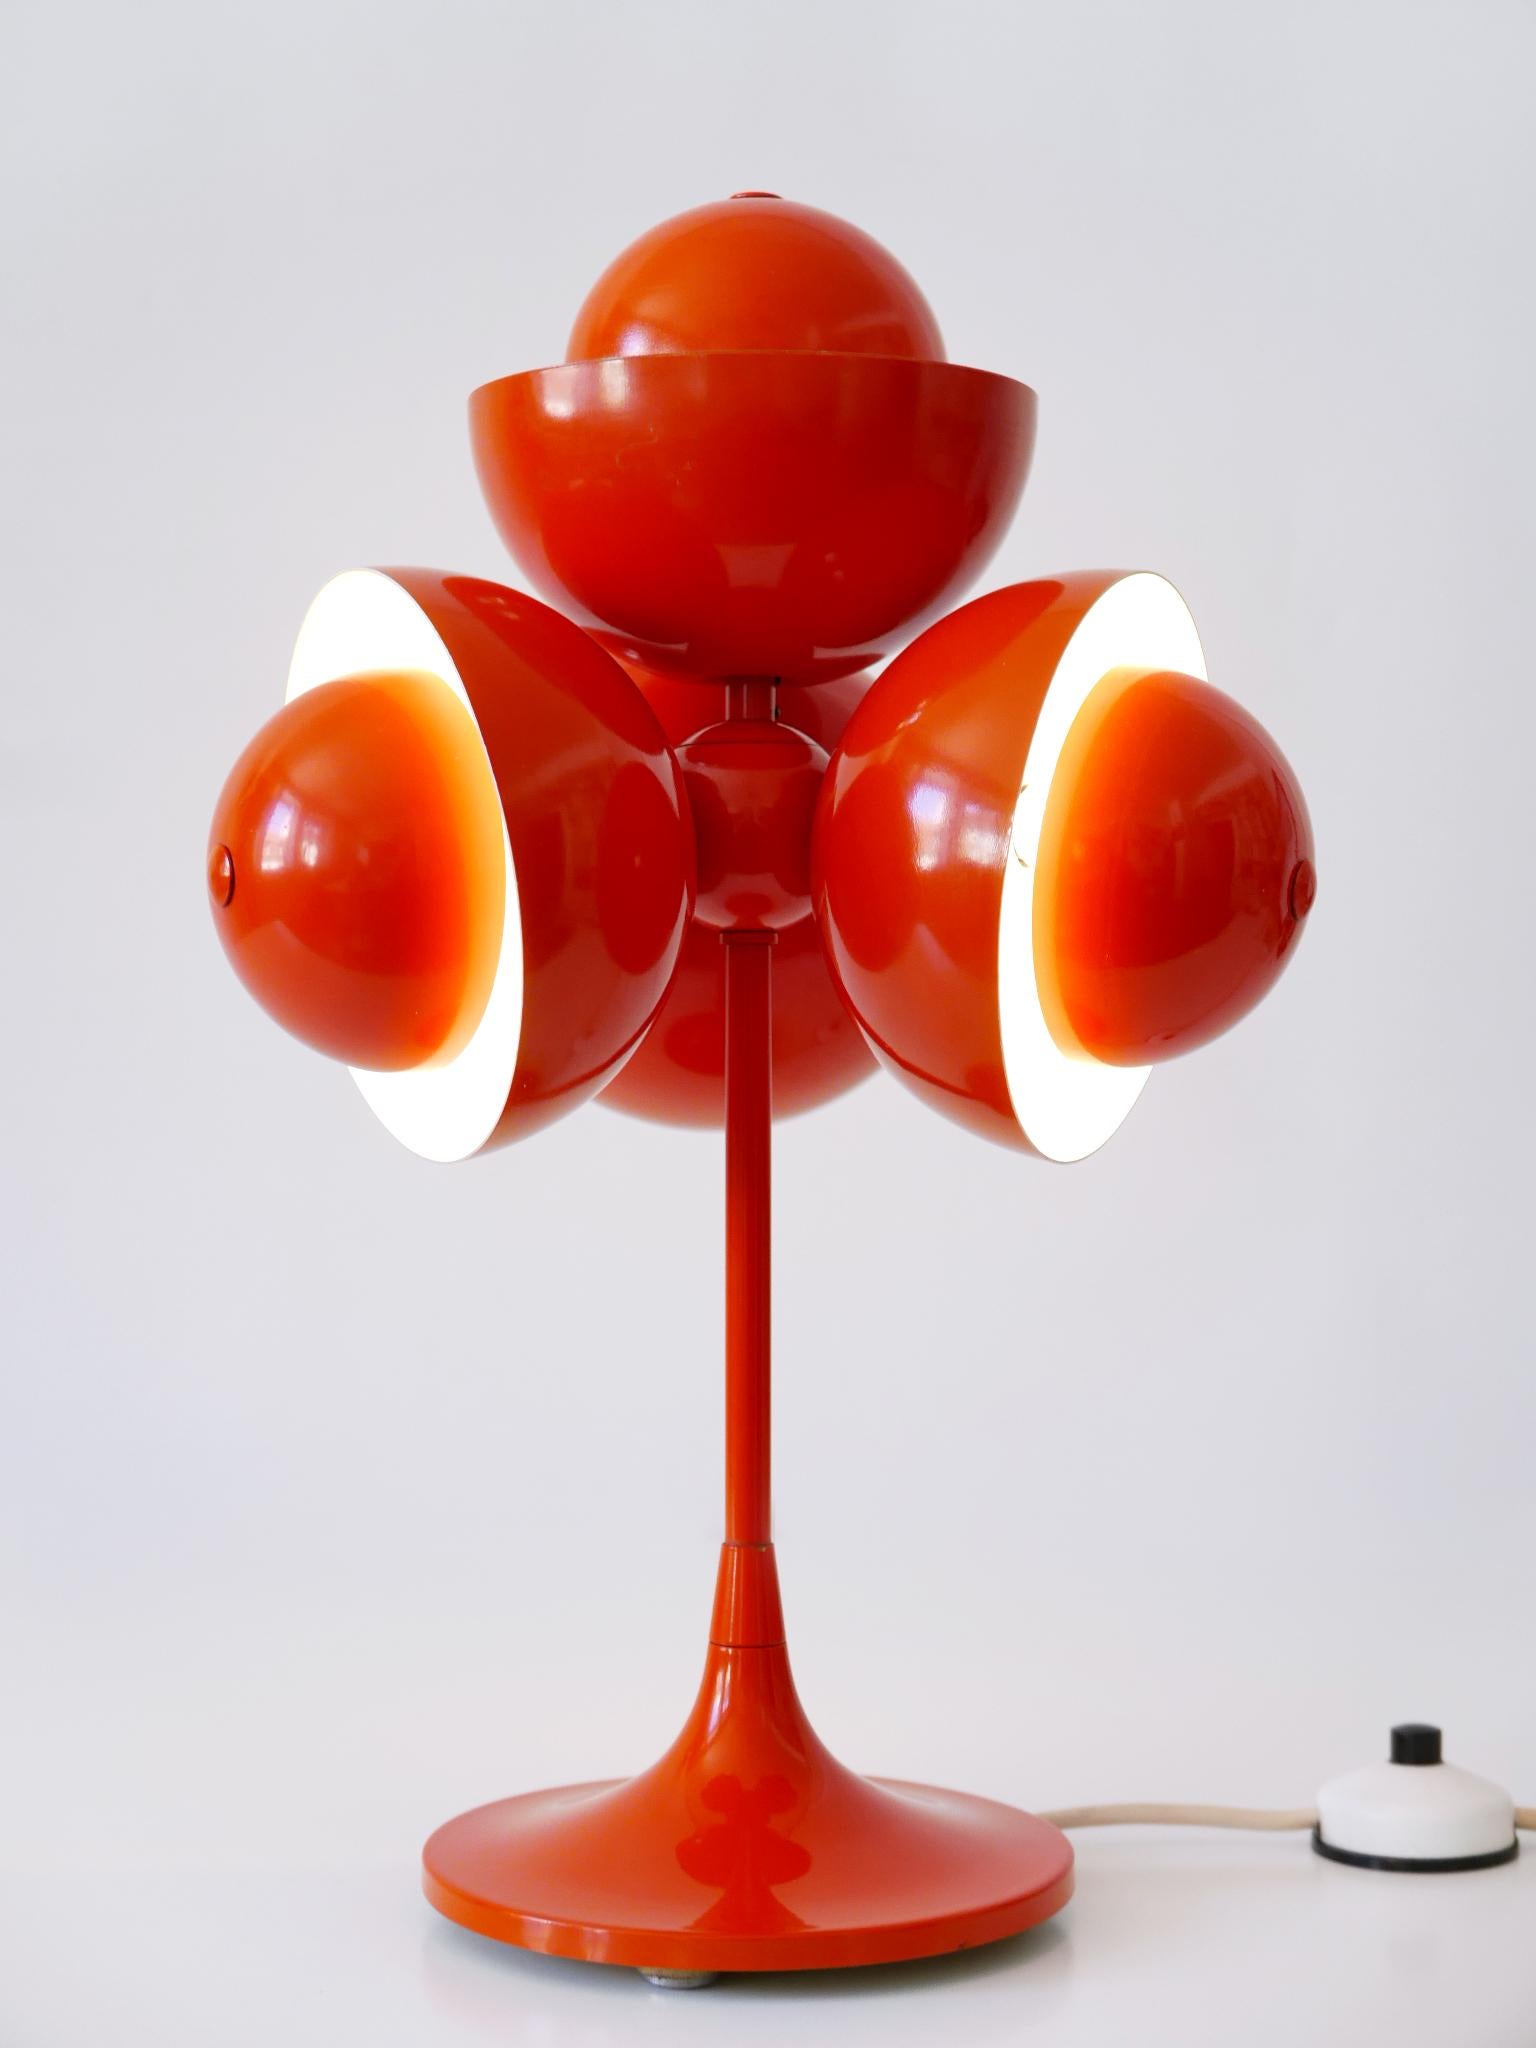 Exceptional & Lovely Mid-Century Modern Flowerpot Table Lamp, Germany, 1970s For Sale 8